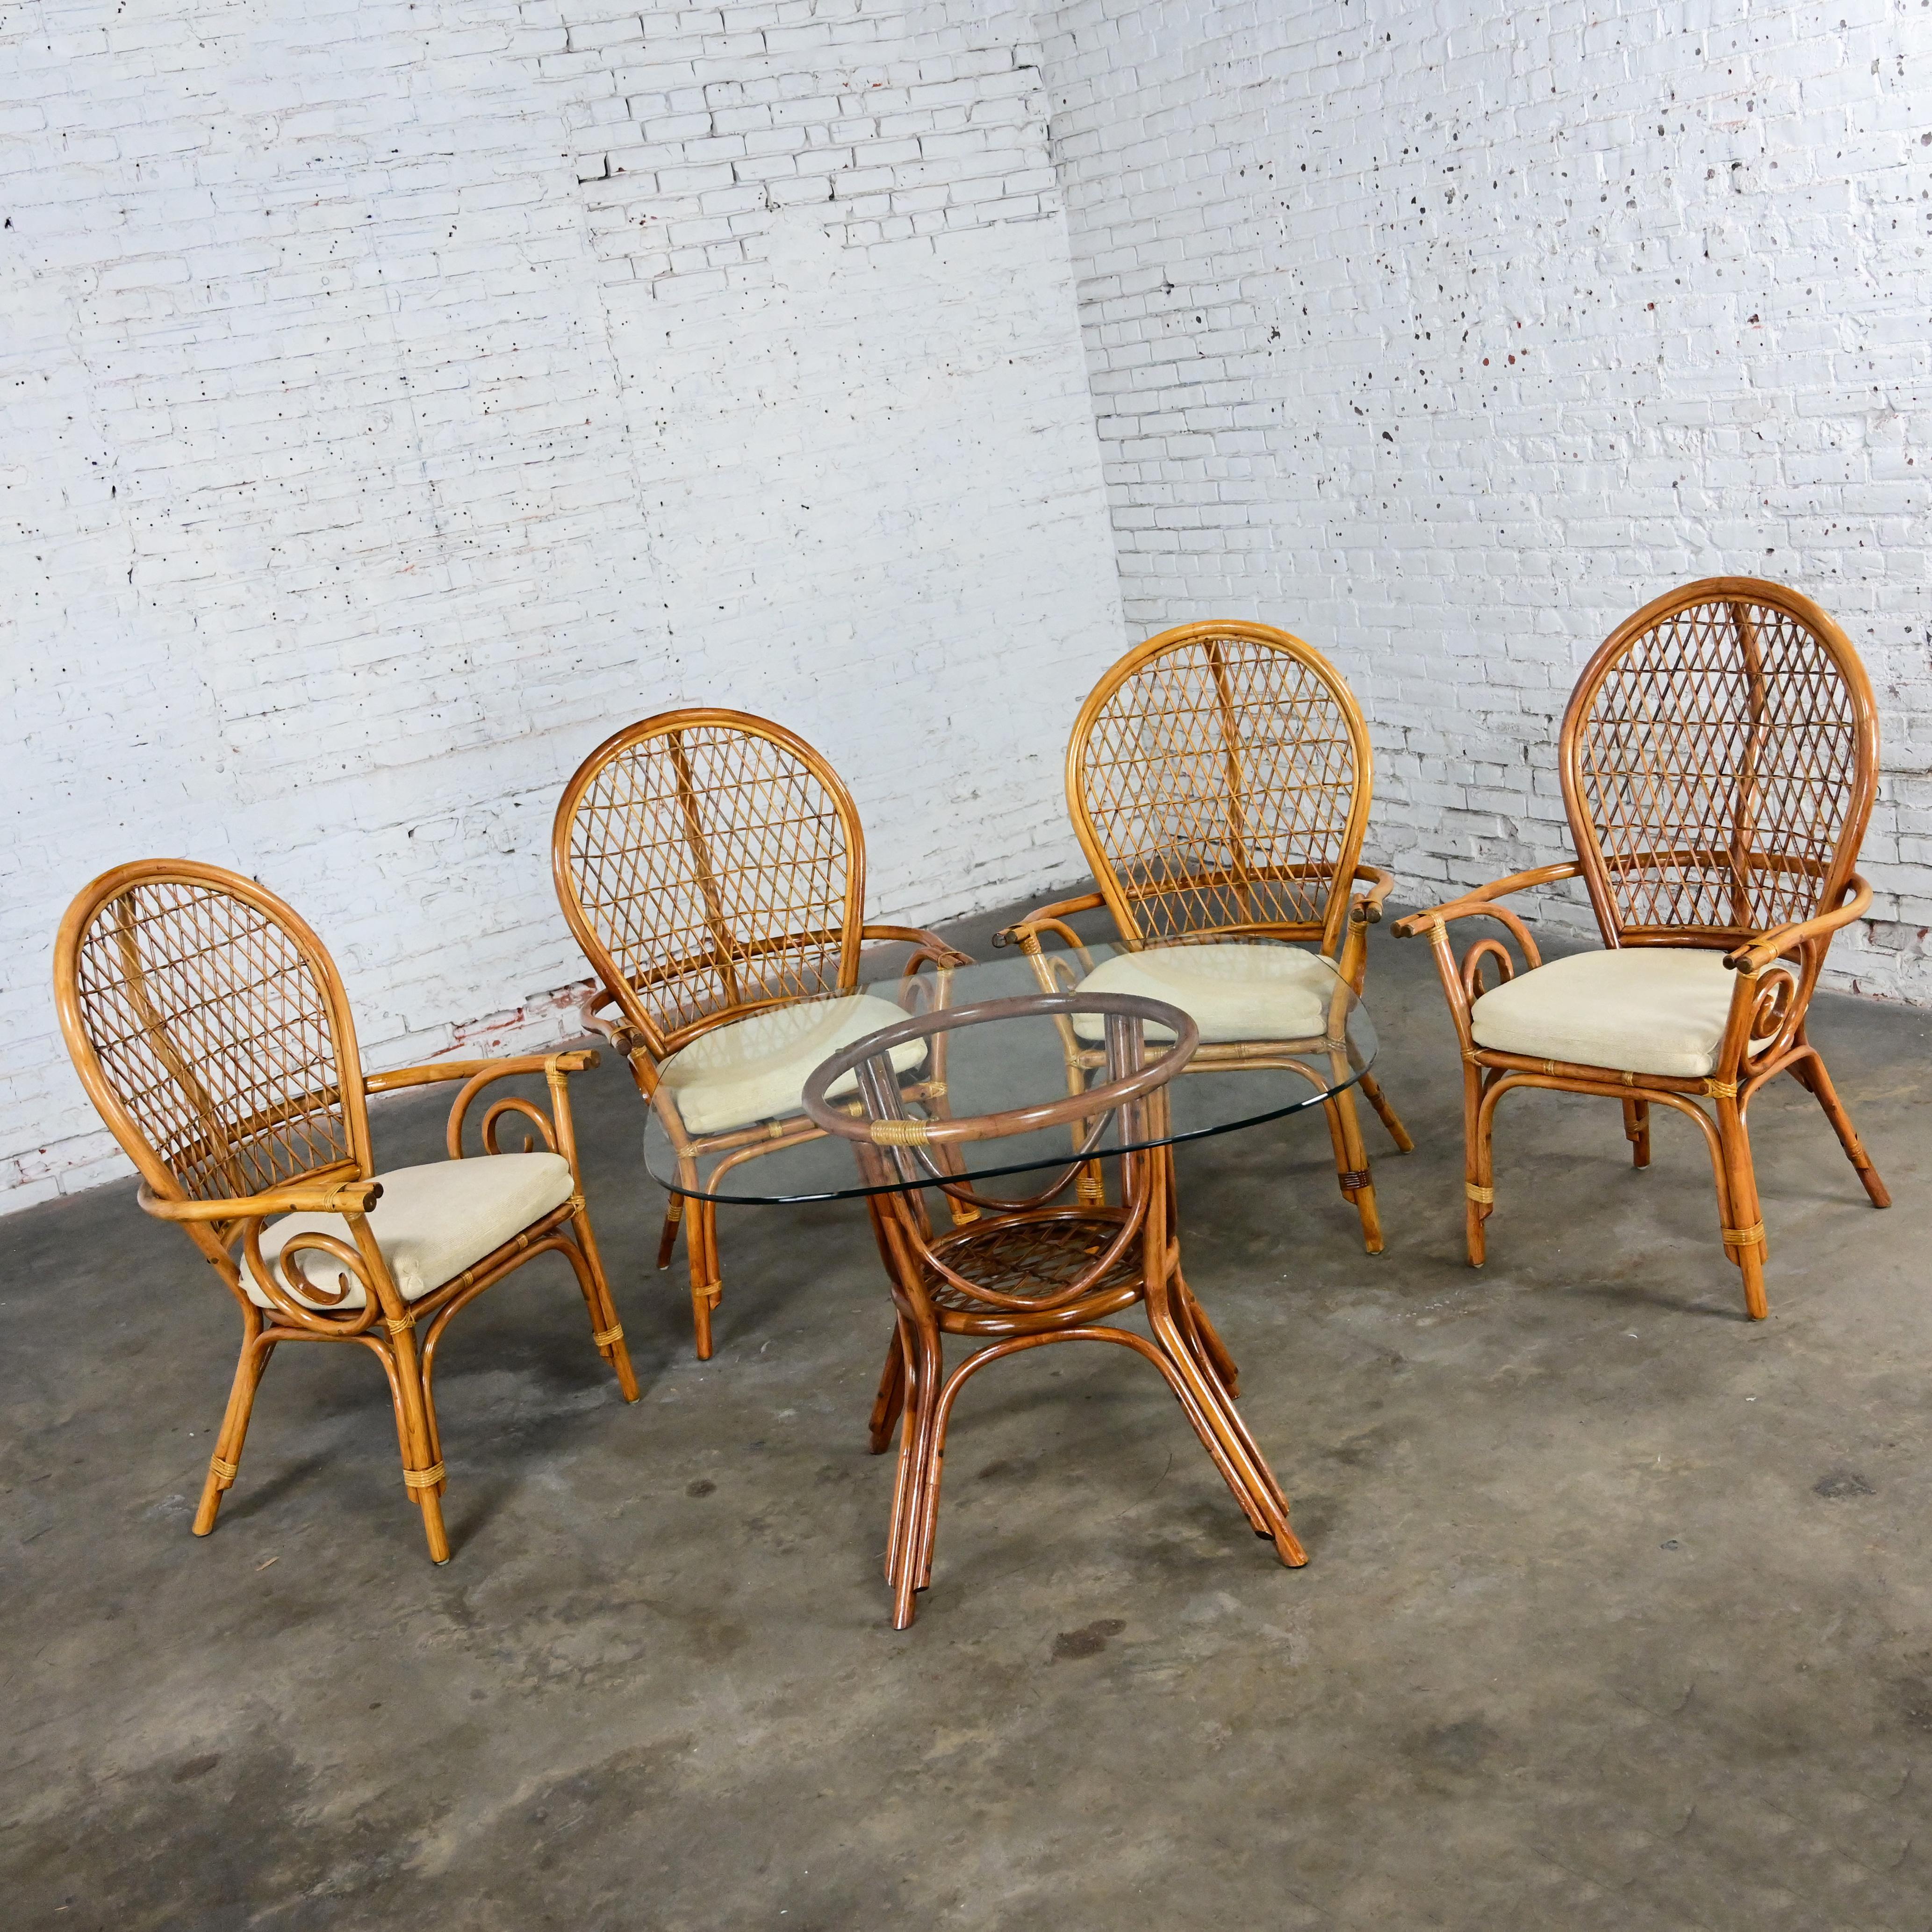 Marvelous vintage Coastal Island Style Rattan glass top dining or game table & 4 matching chairs, a set. Beautiful condition, keeping in mind that these are vintage and not new so will have signs of use and wear even if it has been refinished or